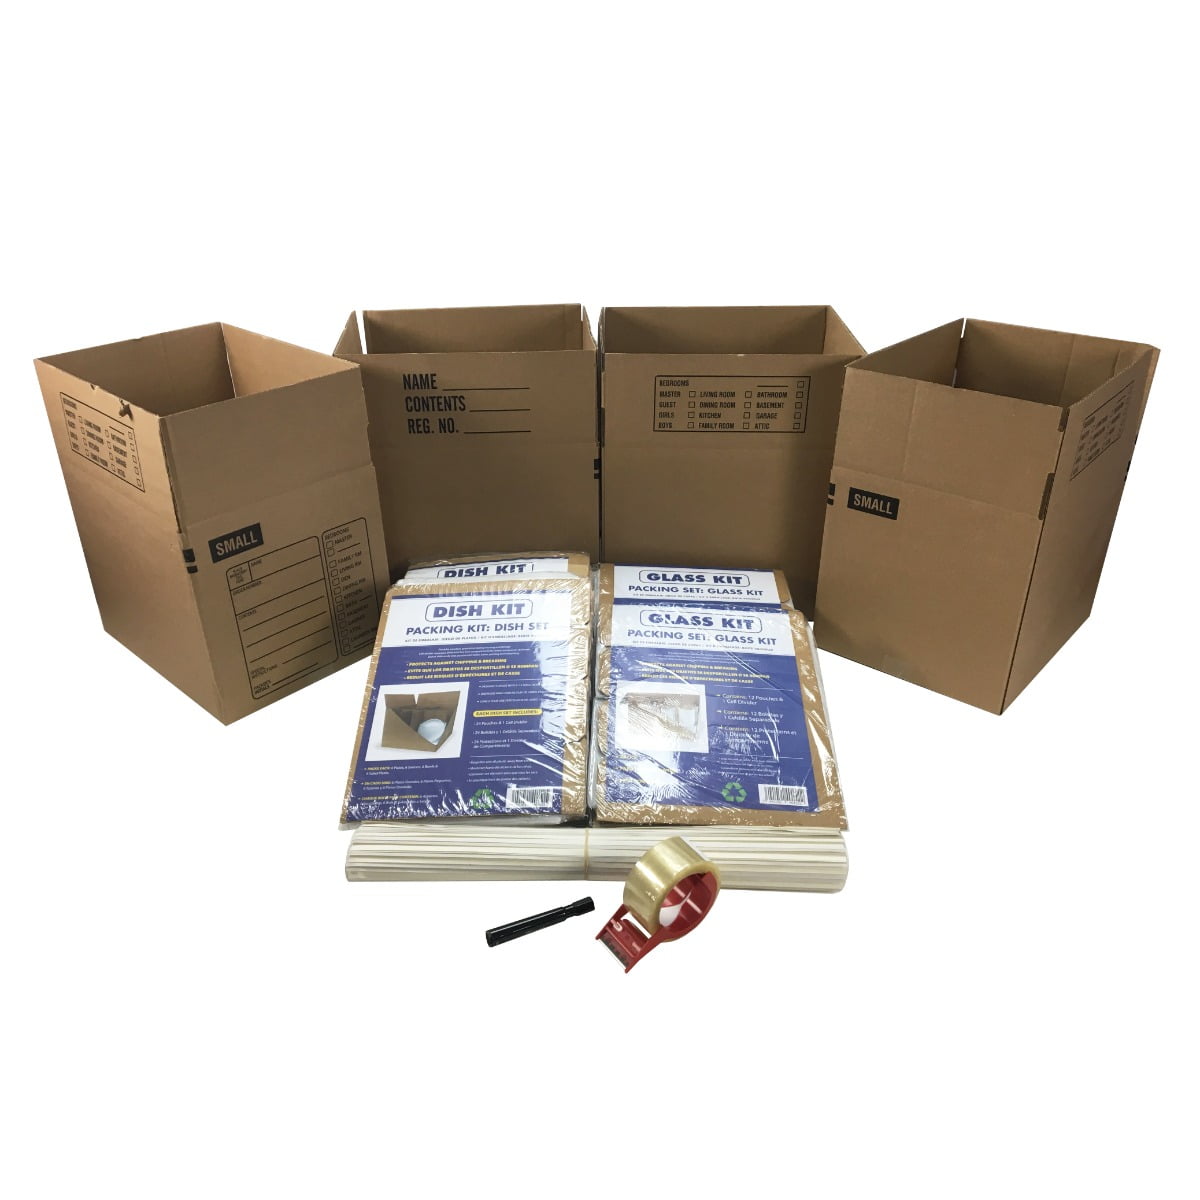  Uboxes 4 Kitchen Moving Boxes Double Wall 18x18x28  boxes,BOXBUNDKIT04 : Box Mailers : Office Products